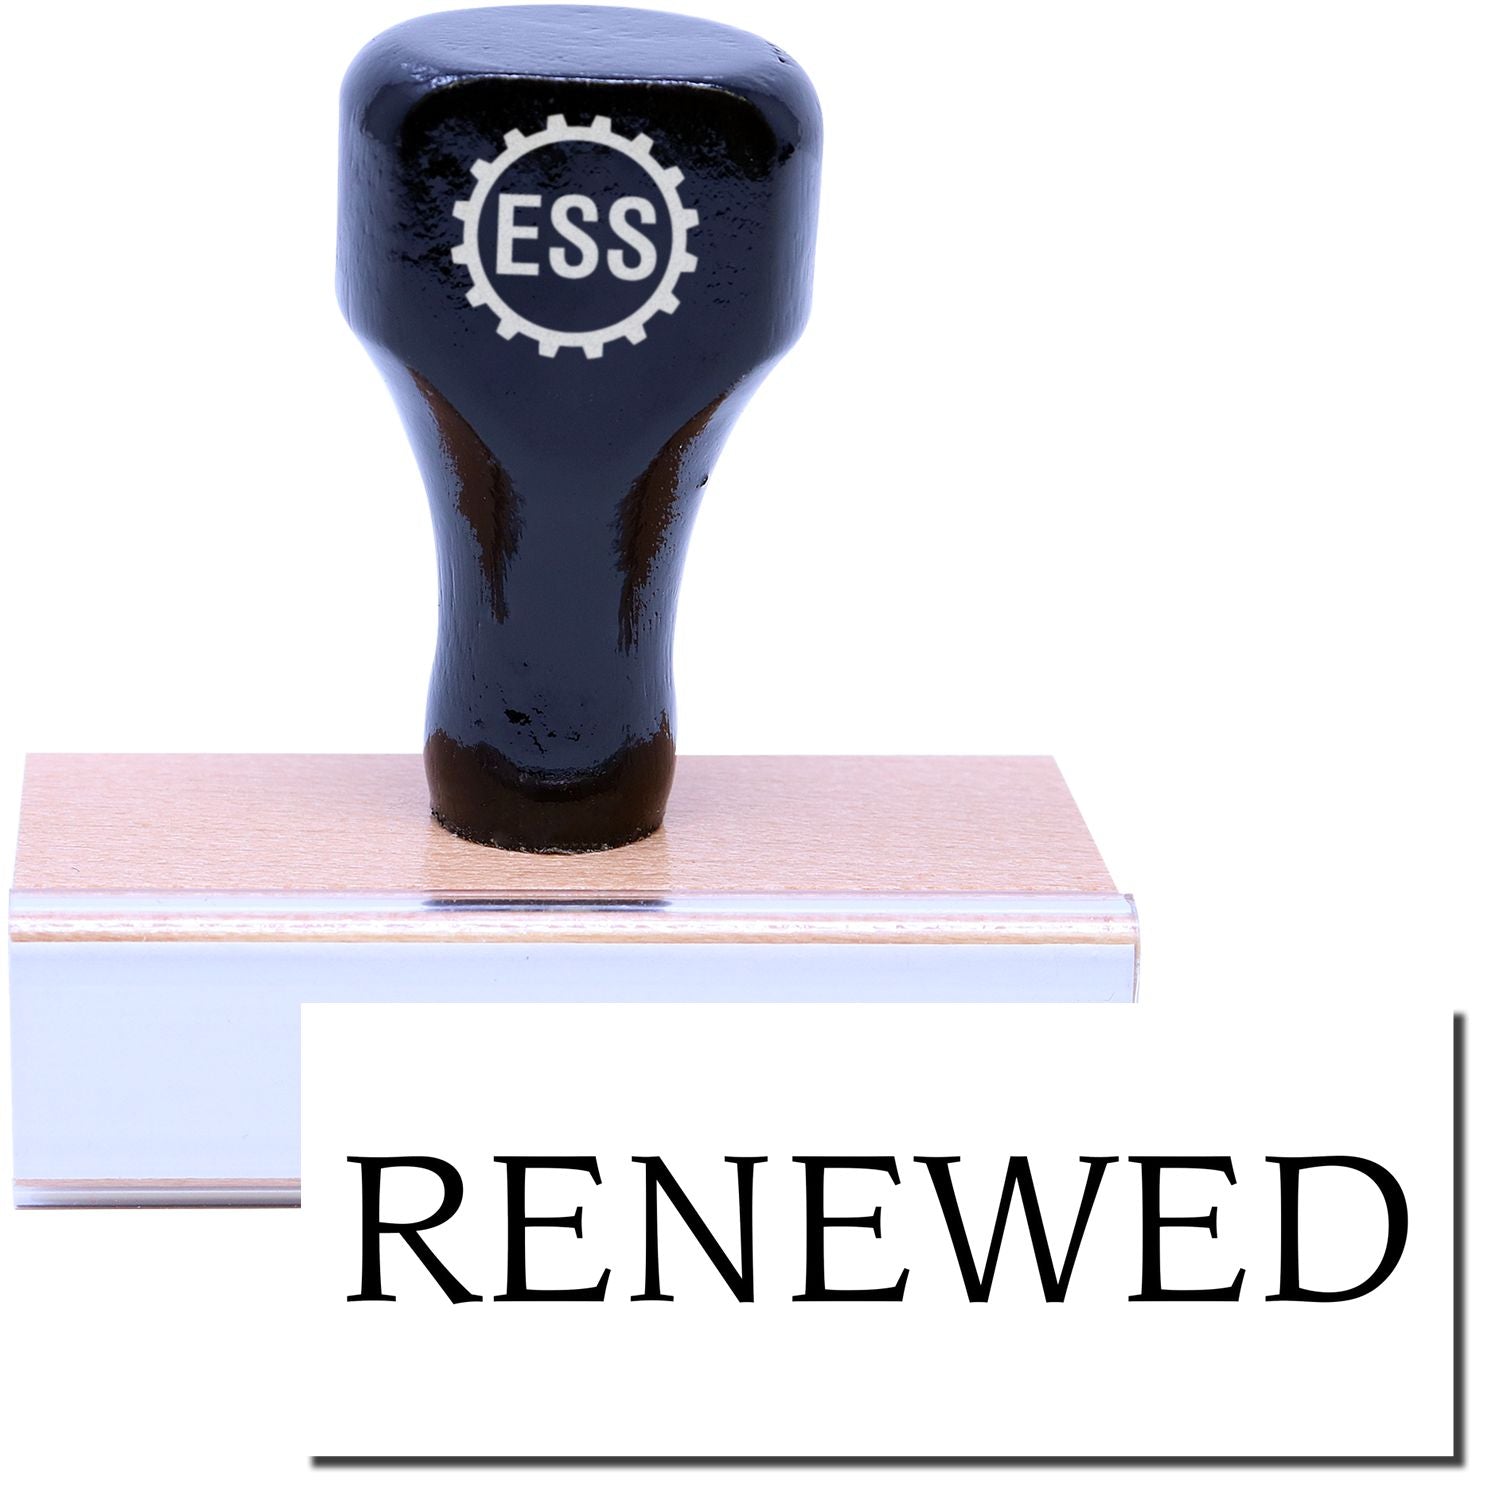 A stock office rubber stamp with a stamped image showing how the text "RENEWED" is displayed after stamping.